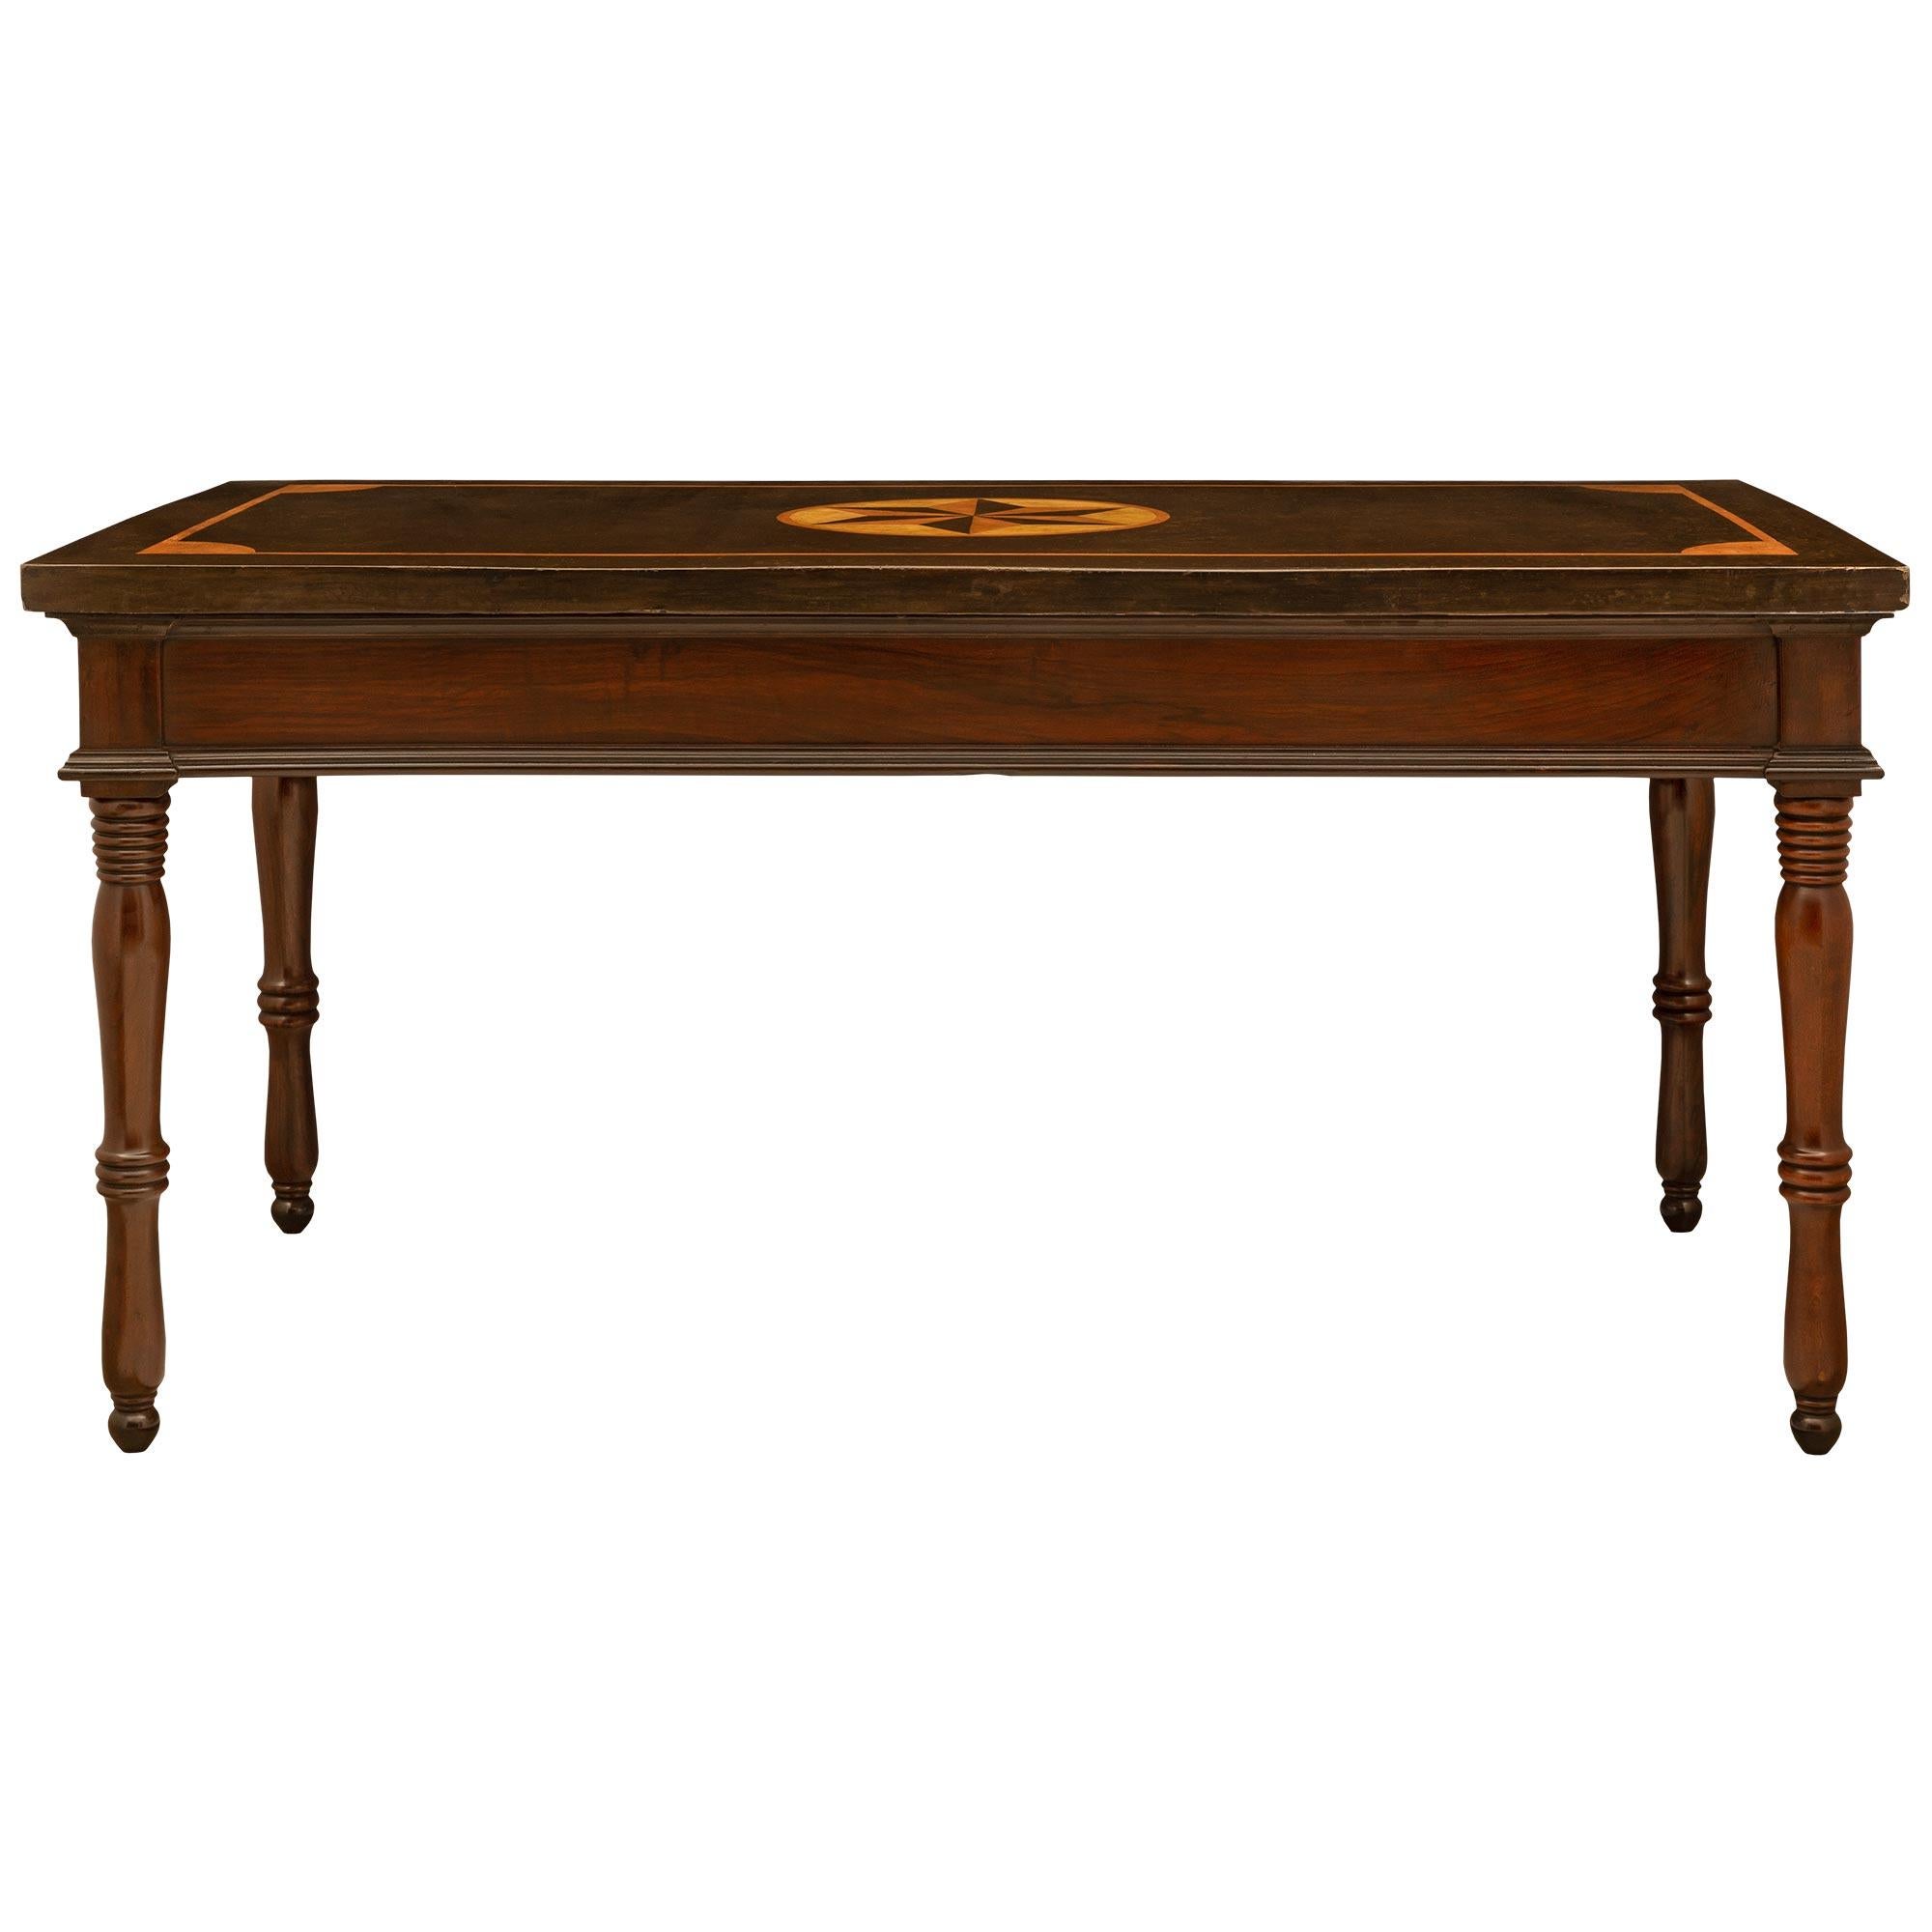 Italian 19th Century Tuscan St. Walnut and Scagliola Center Table For Sale